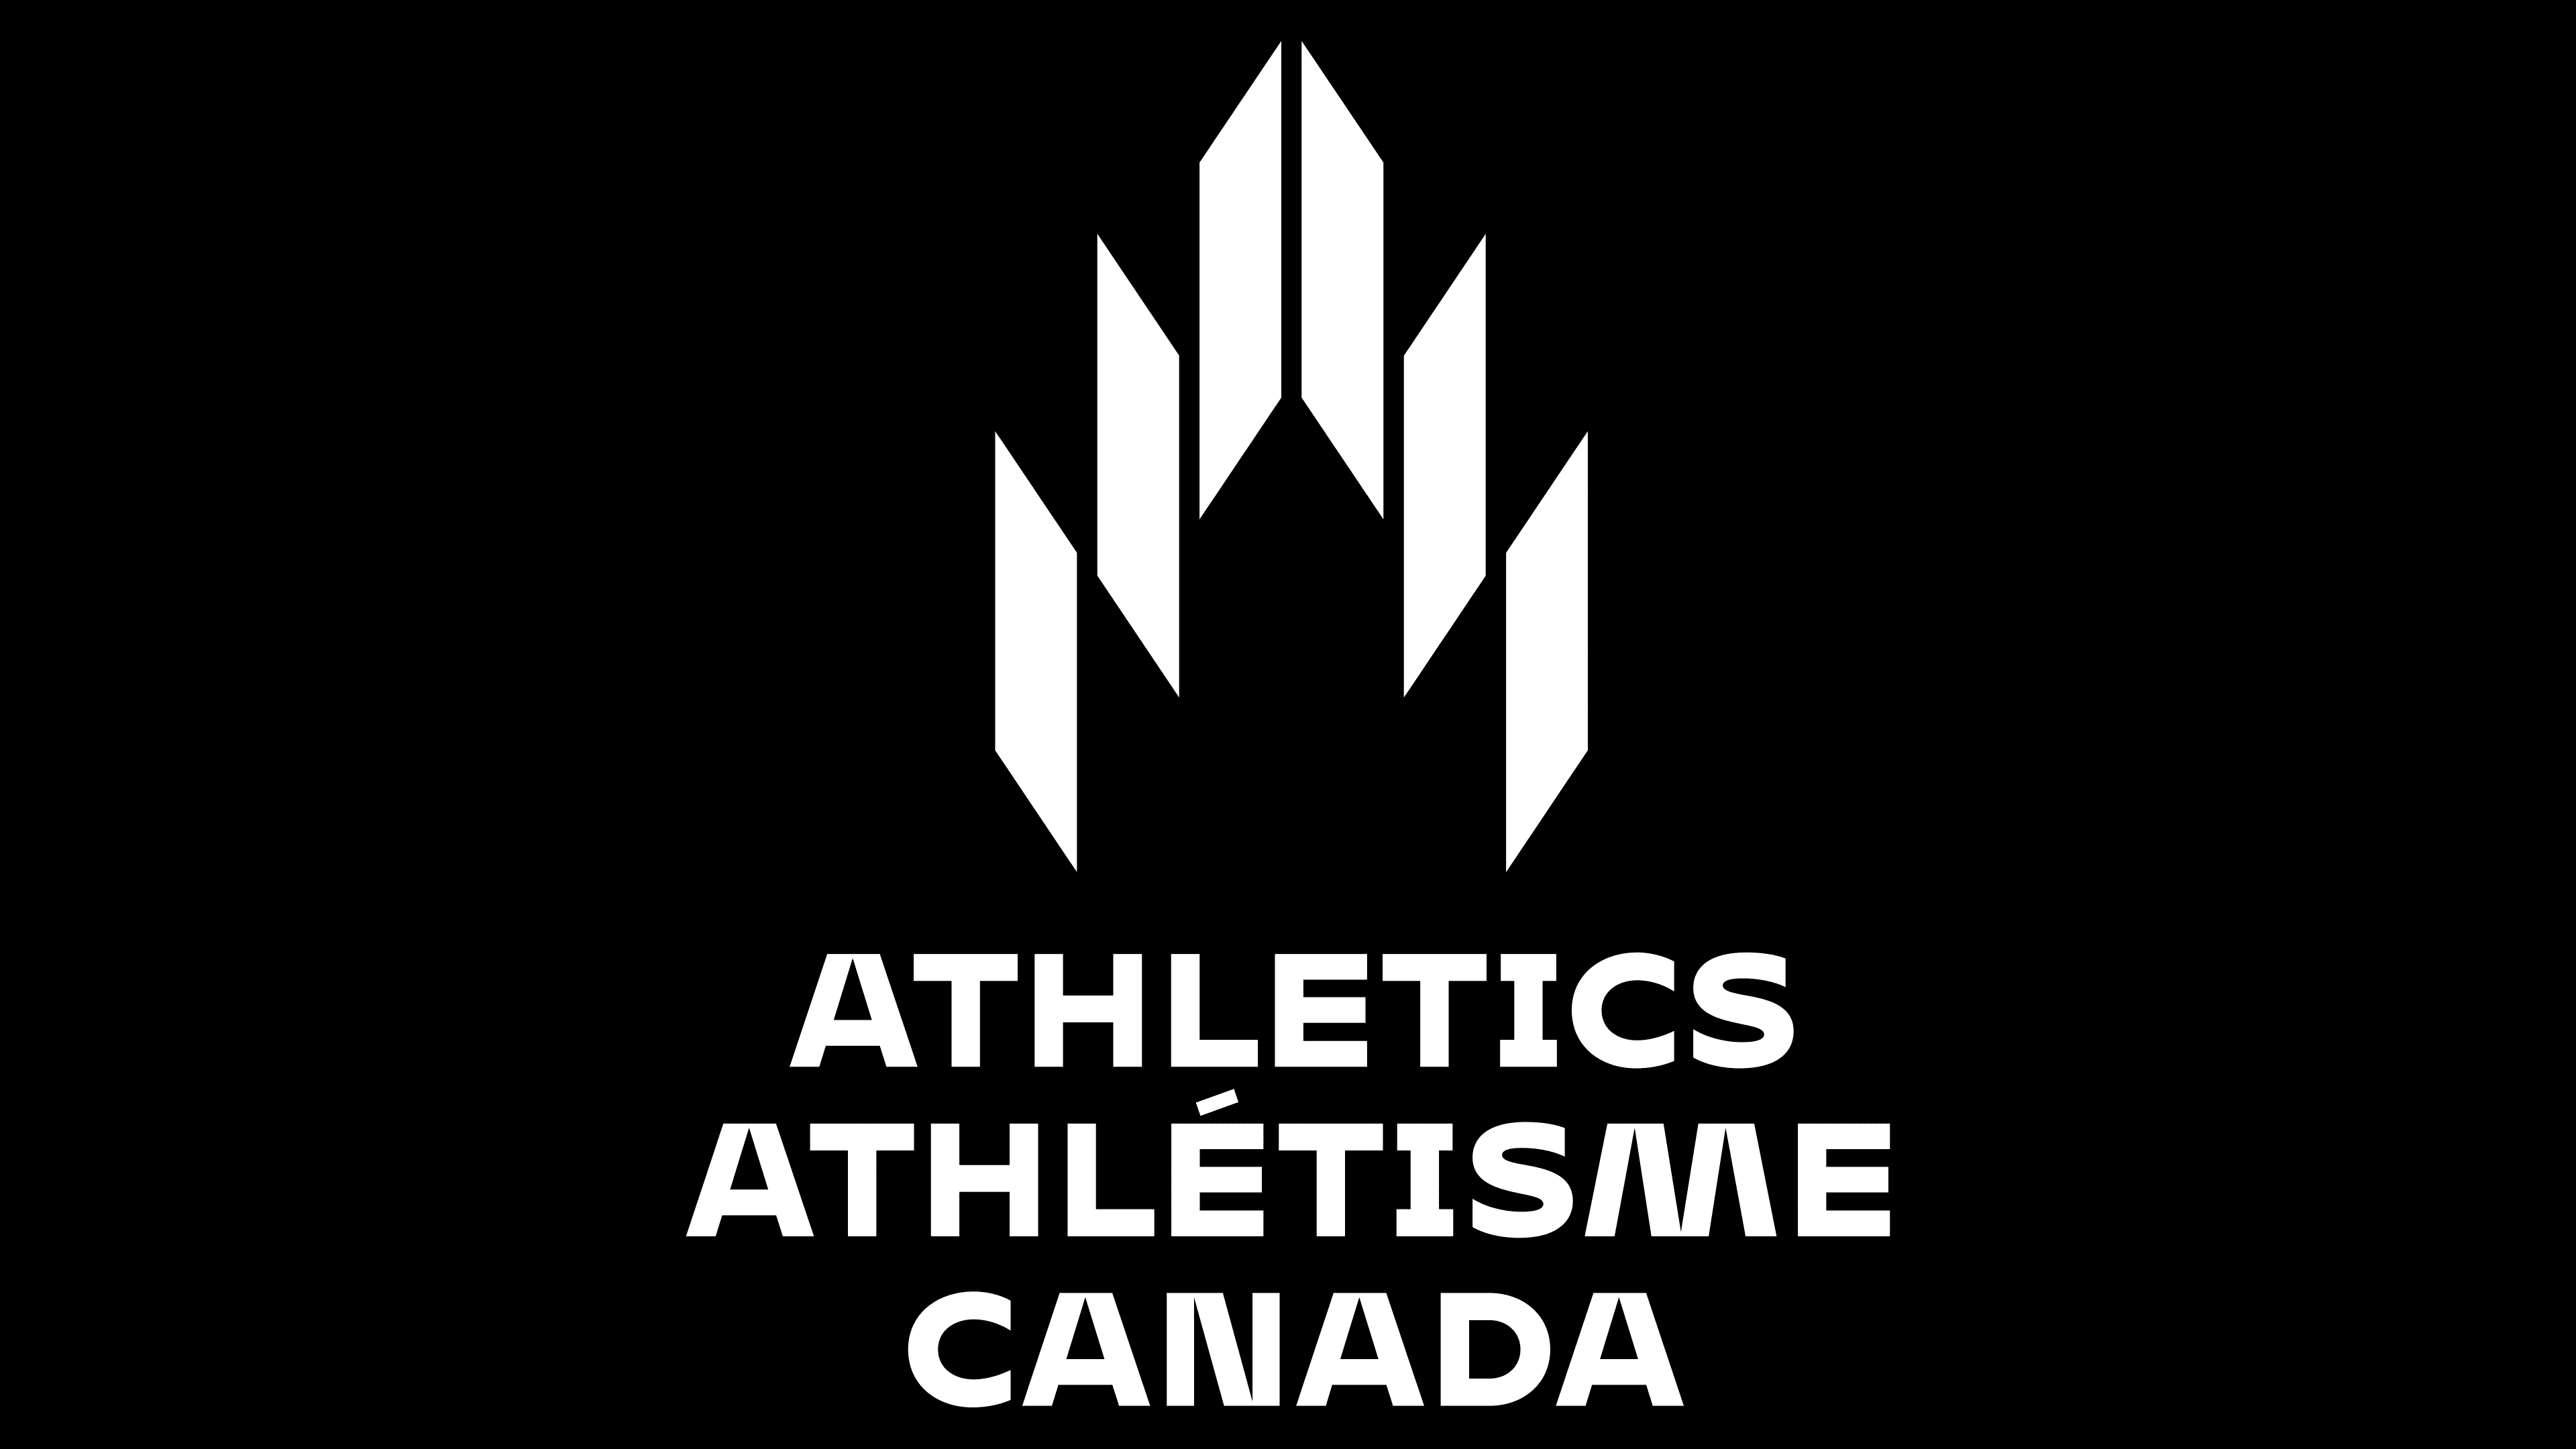 Creating a new brand identity for Athletics Canada • Sport for Life